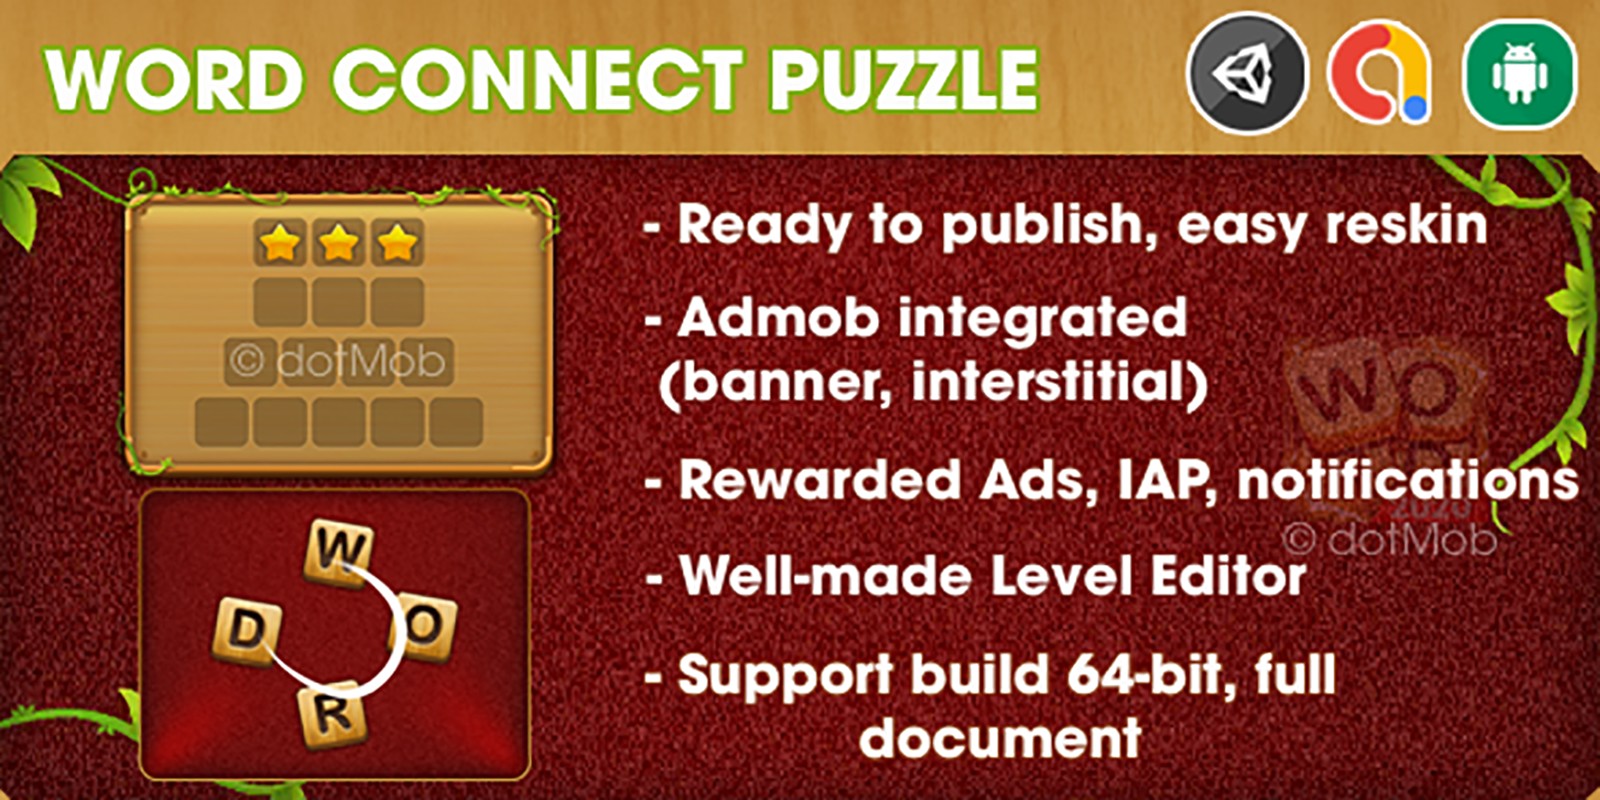 Word Connect Puzzle - Unity Template Project (Android + iOS + AdMob + Notification)